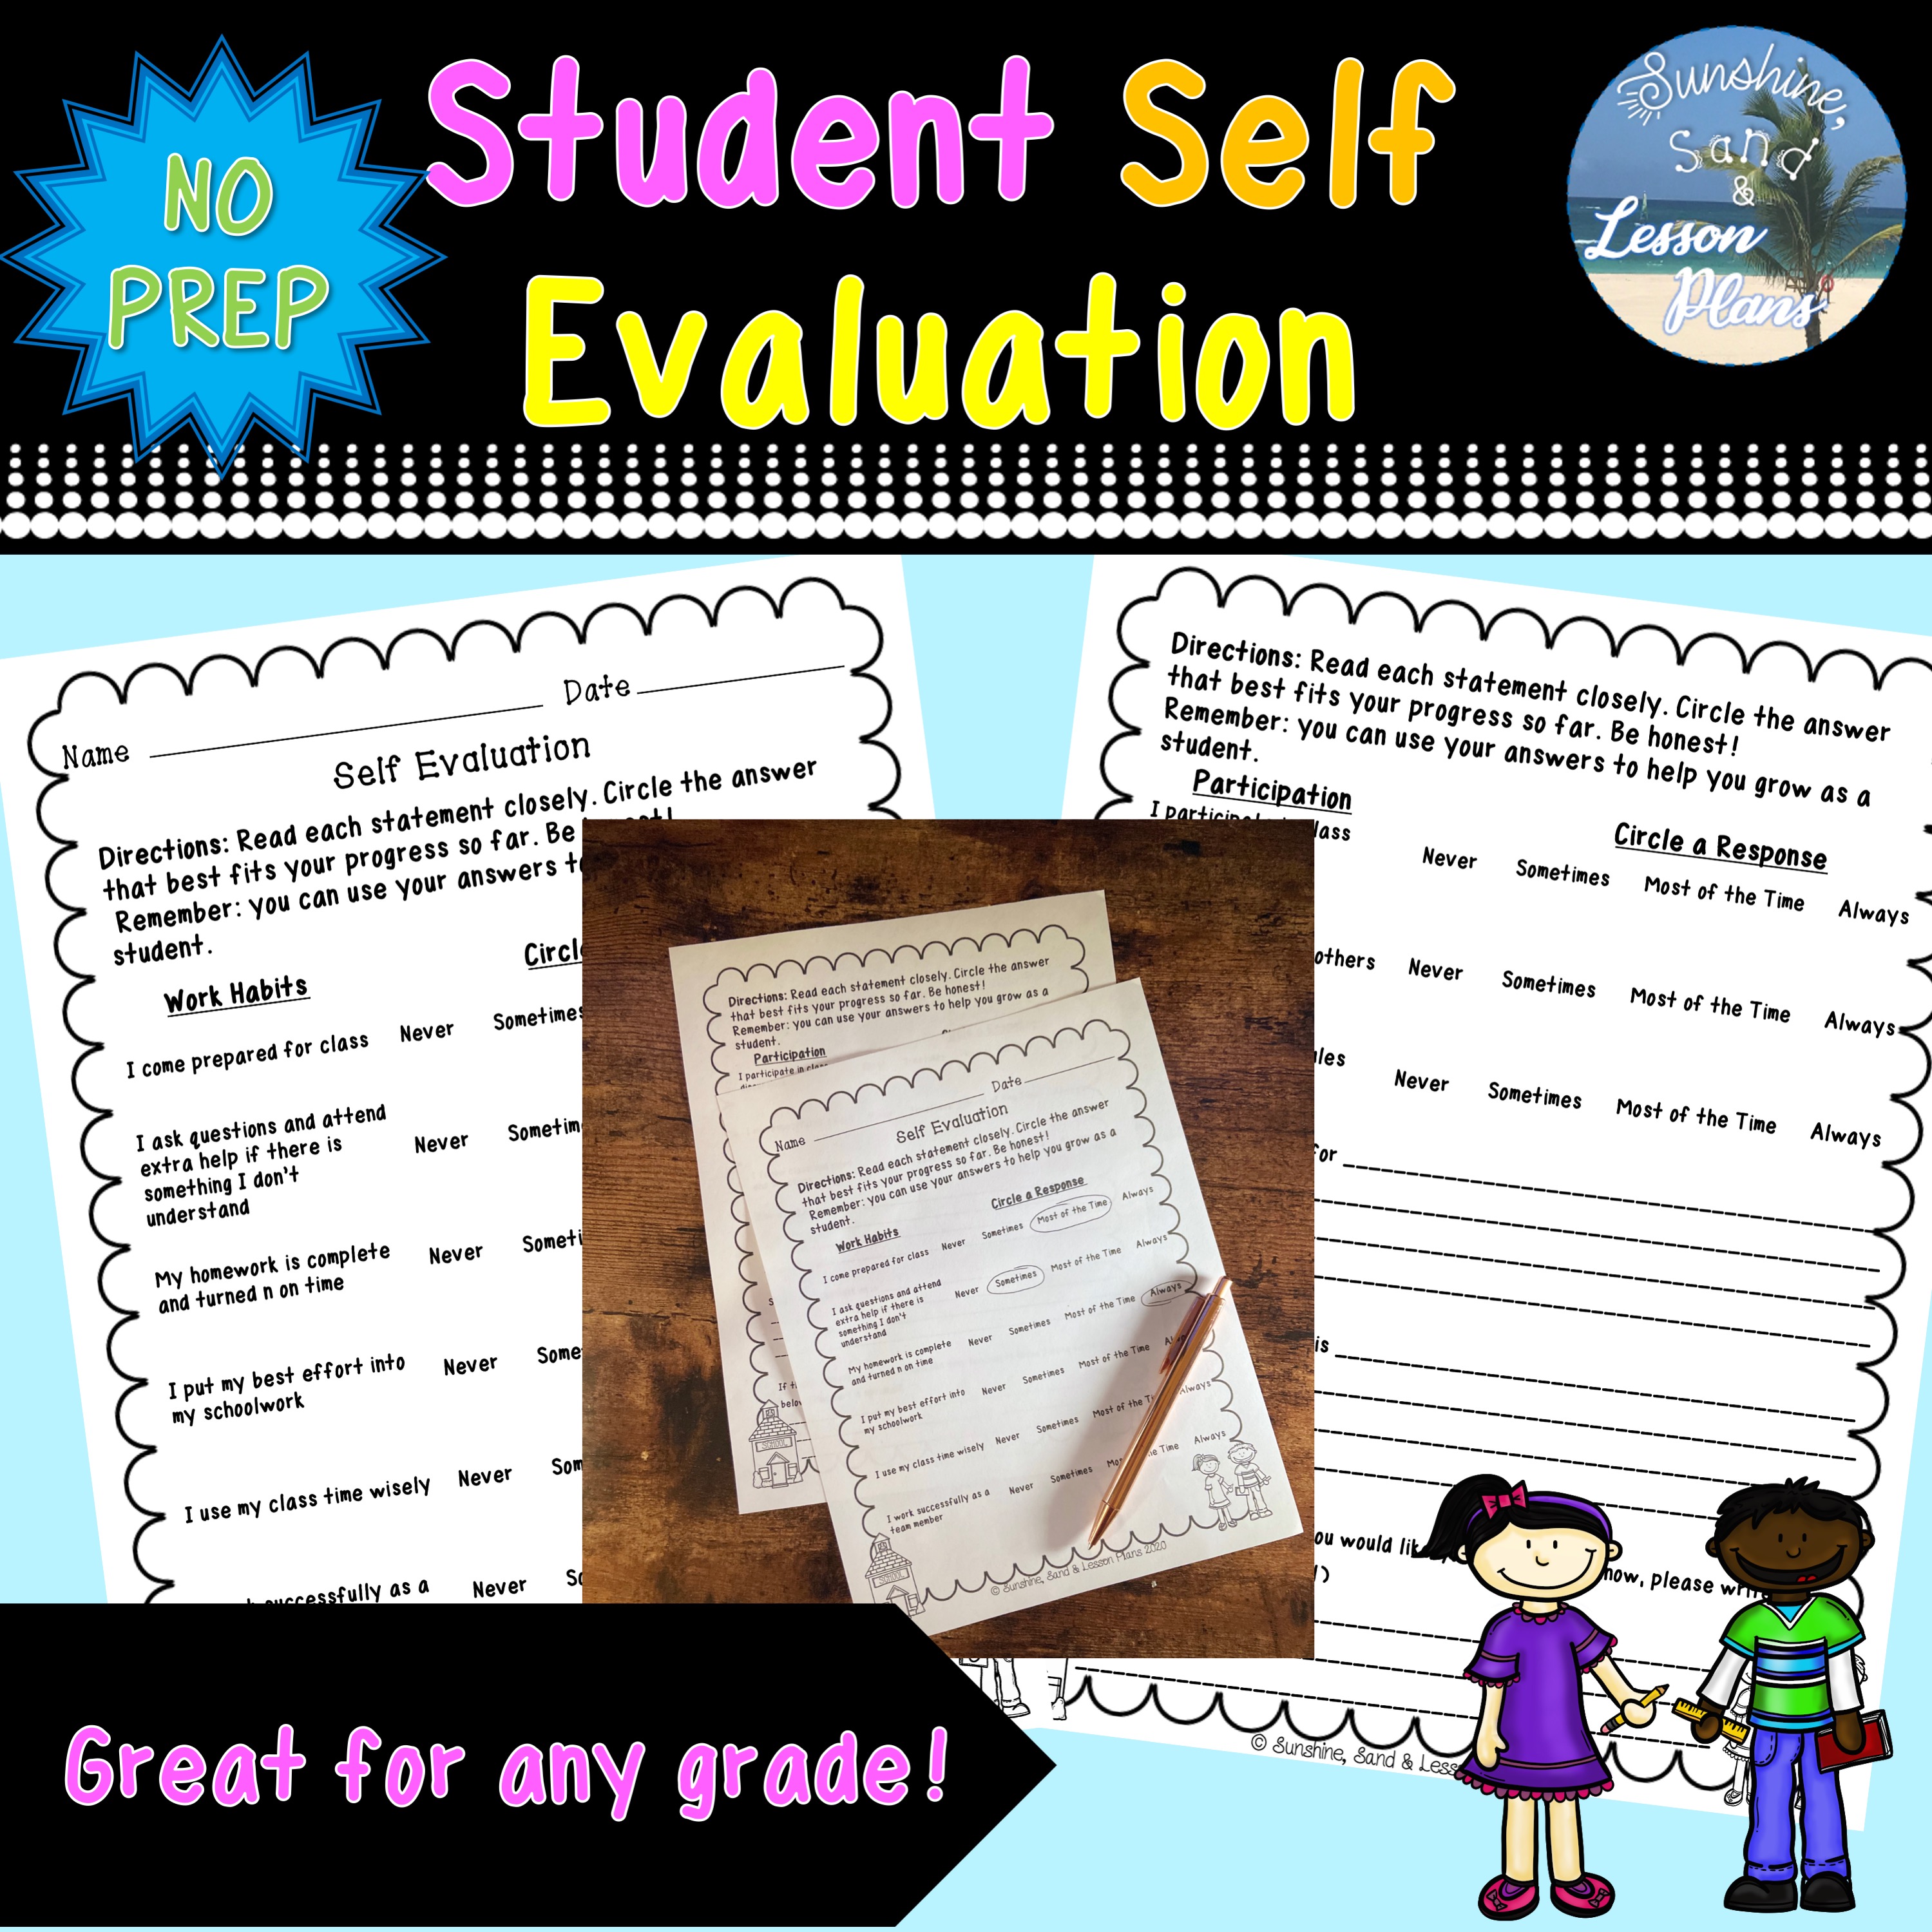 Student Self Evaluation's featured image